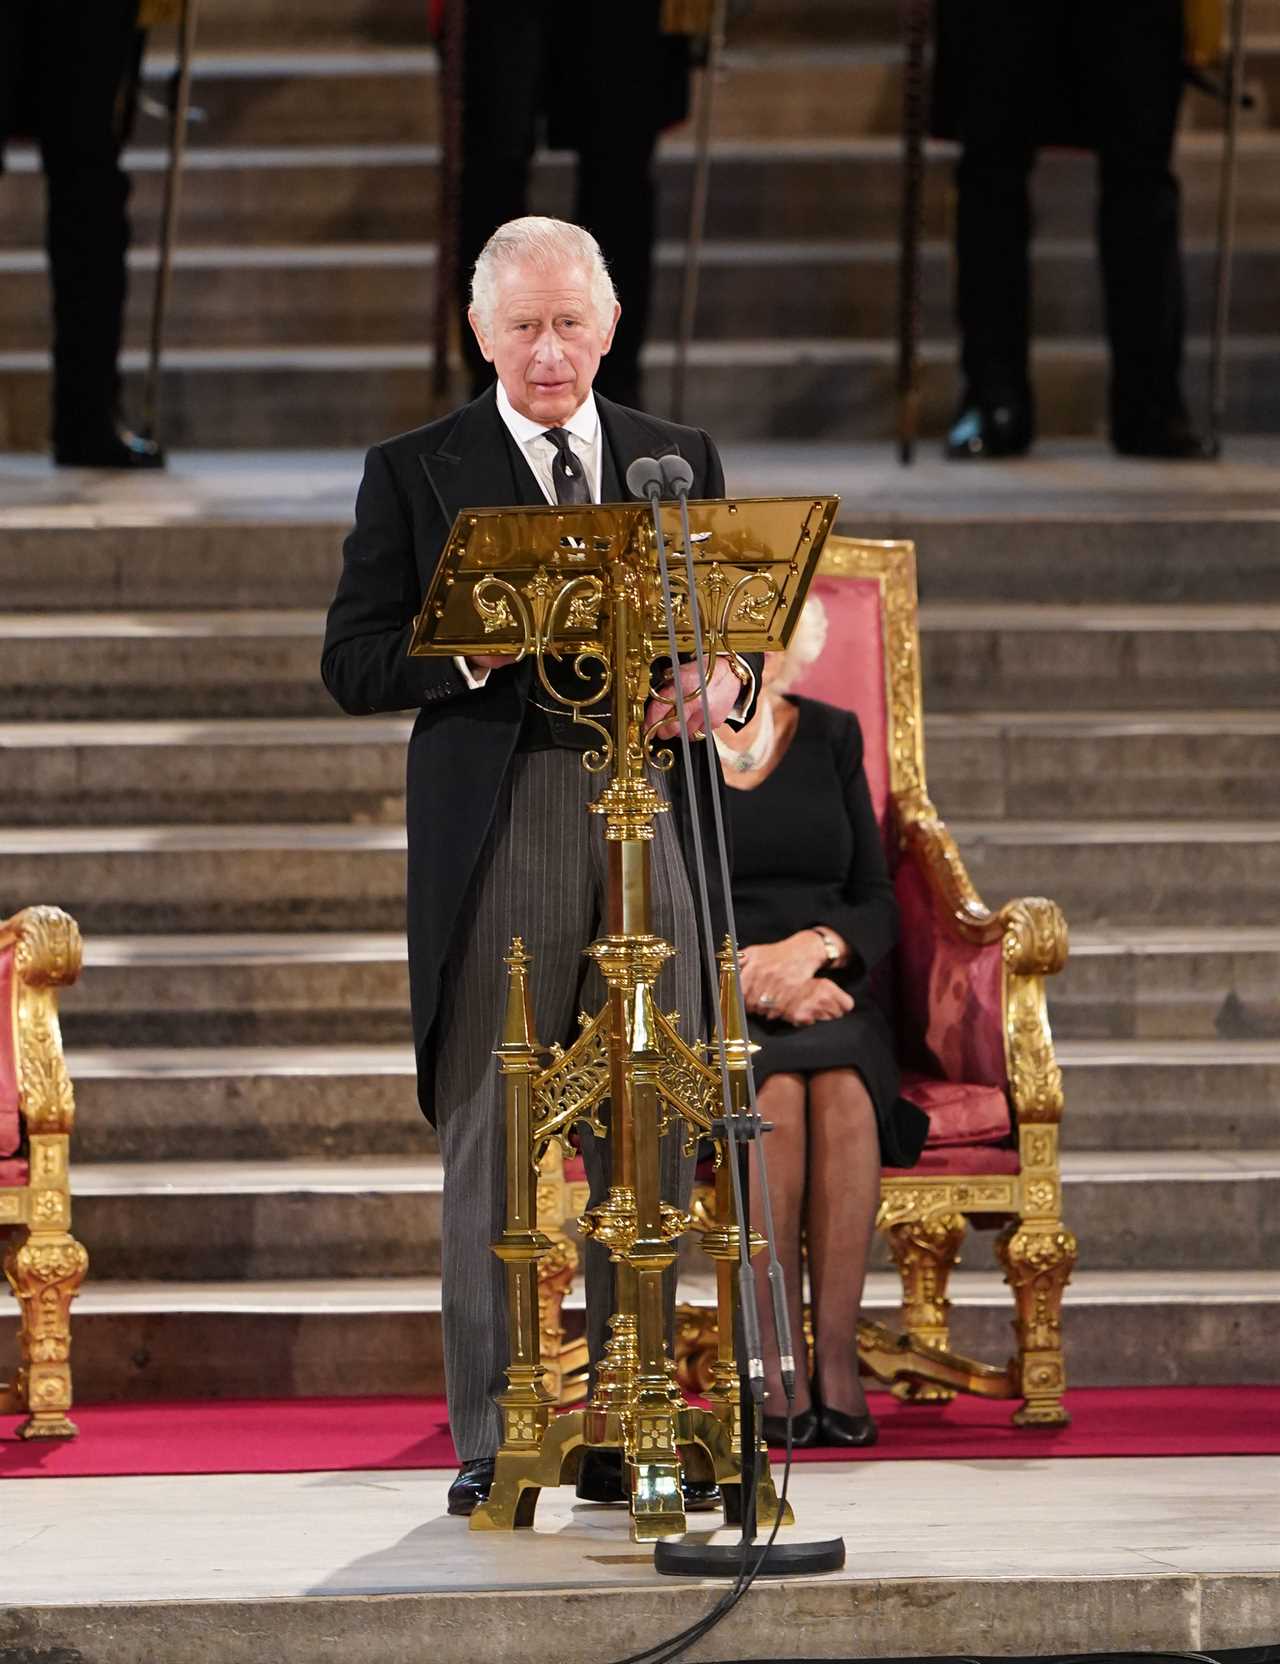 King Charles III addressed MPs and Peers in a historic speech